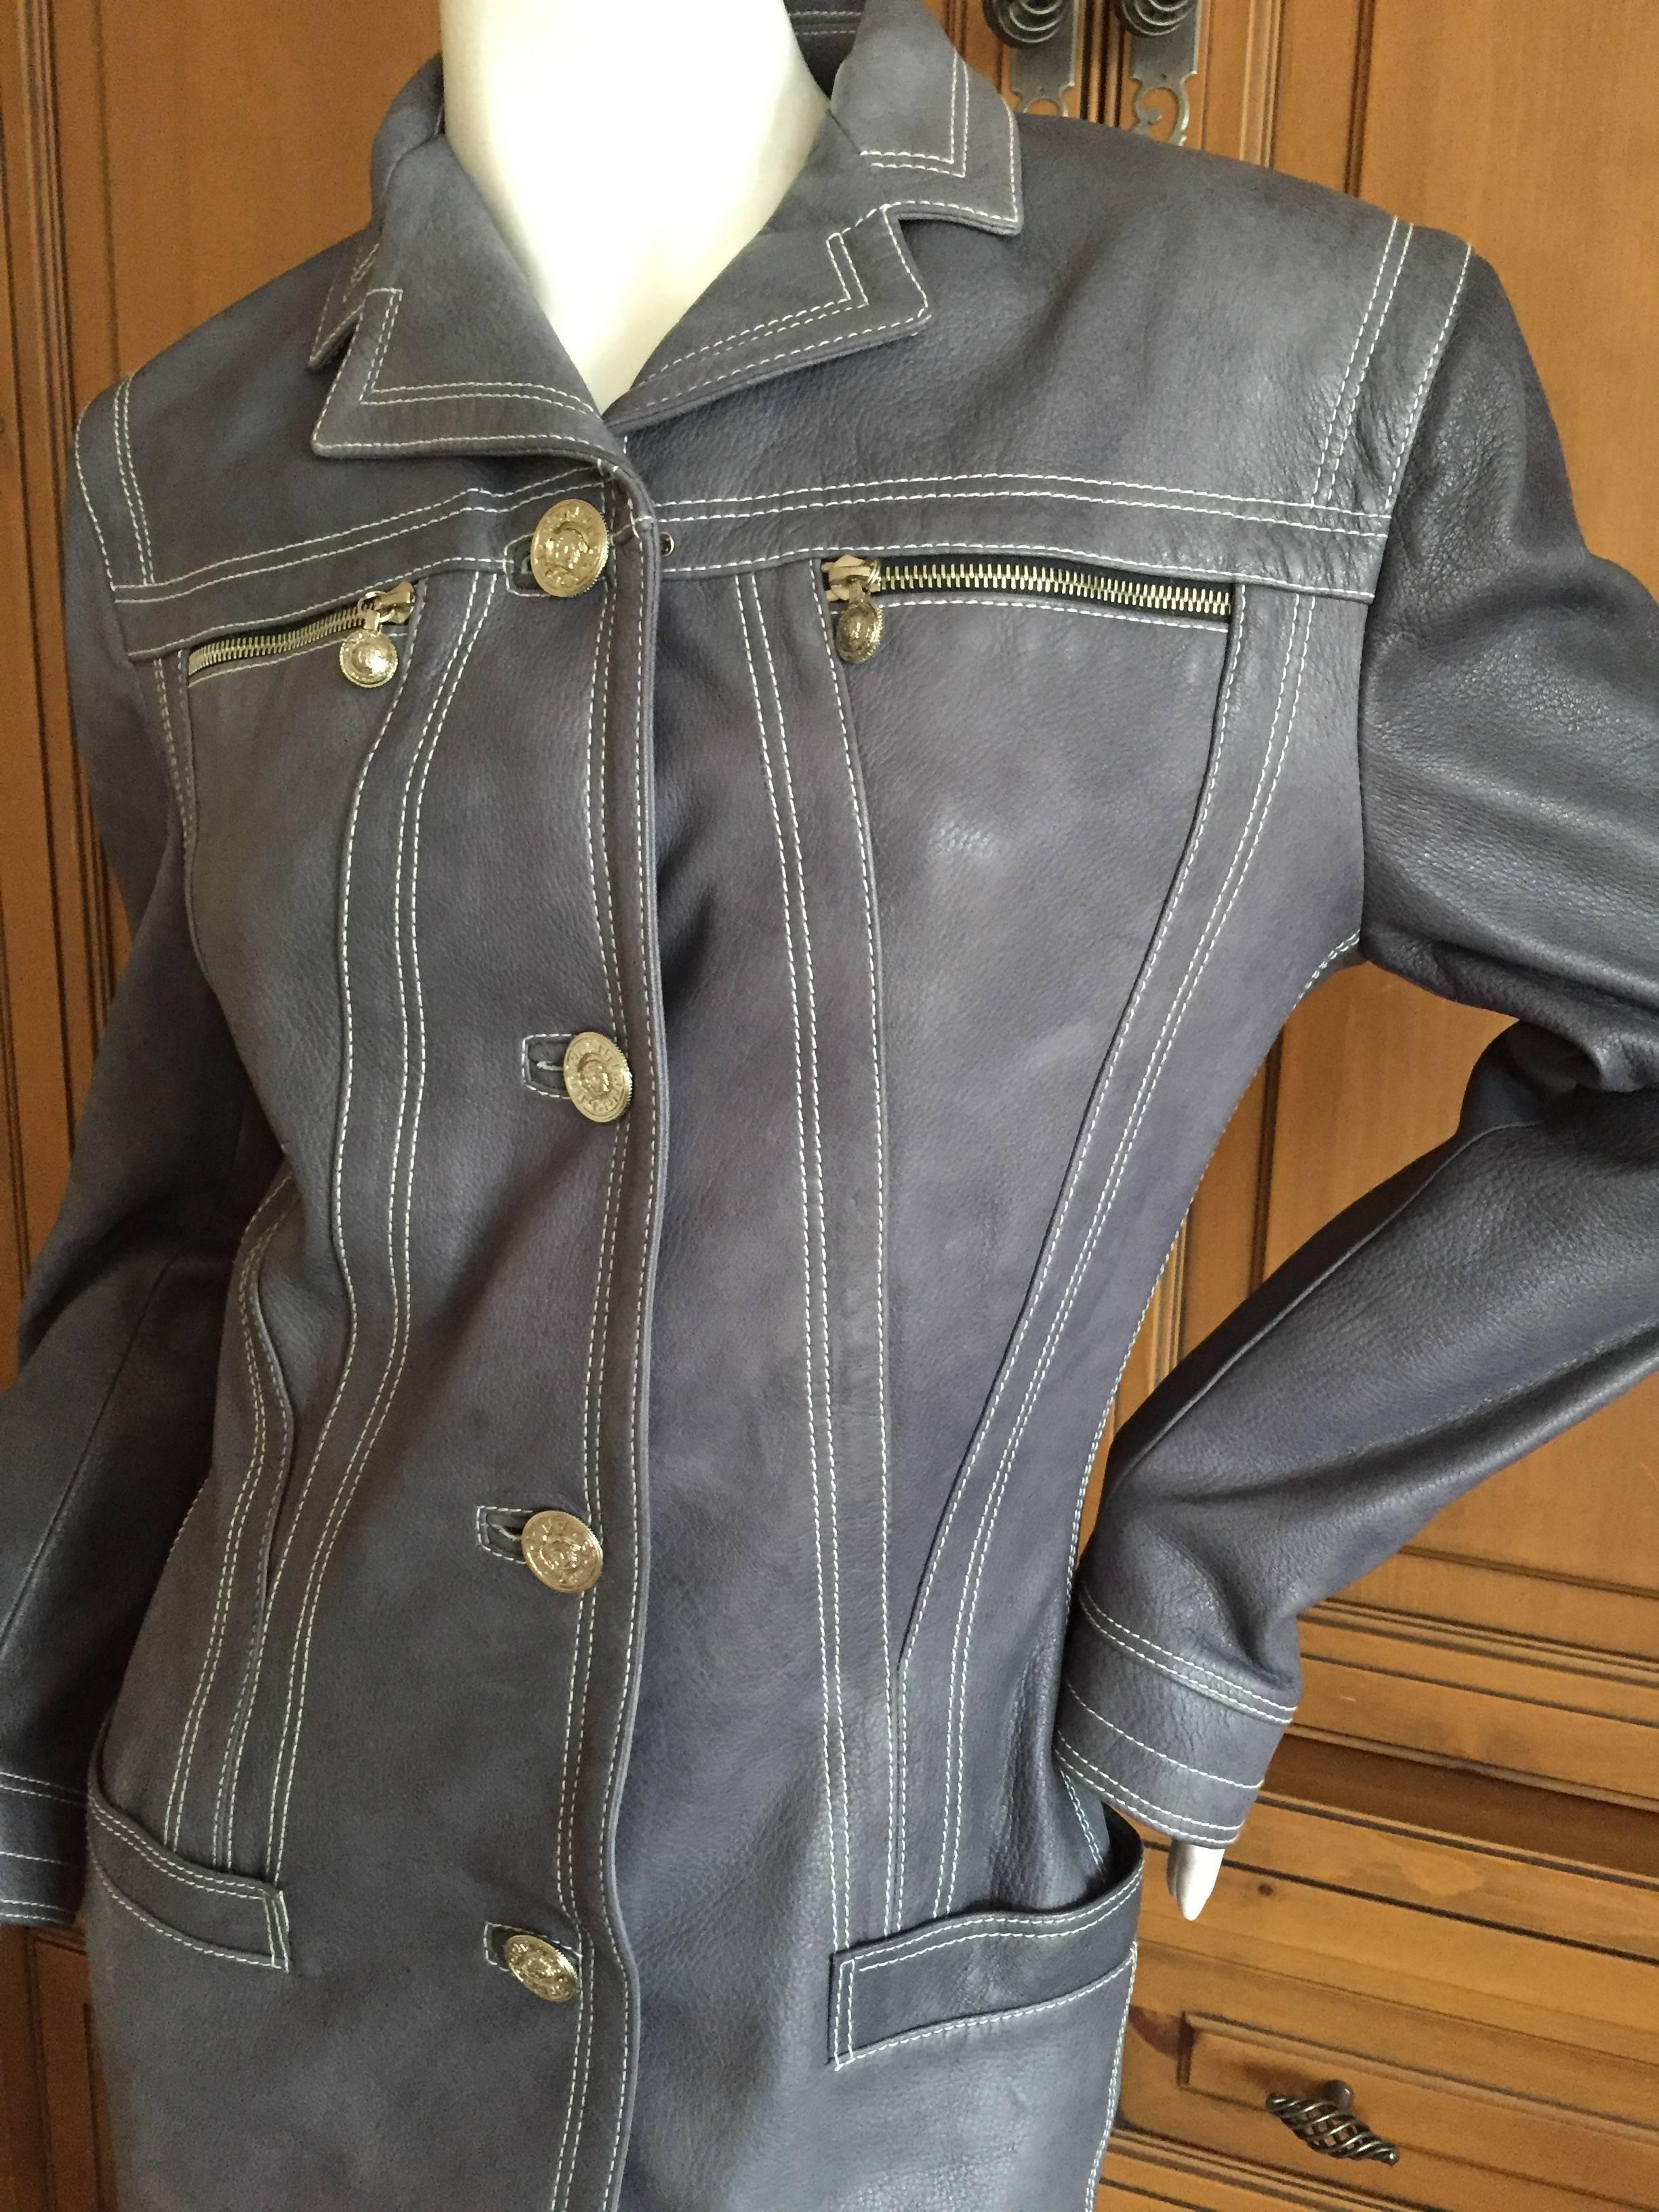 The color of your favorite faded blue jeans, the top stitching on the leather resembles stitching on blue jeans.
SIlver Medusa buttons.
Bust 38